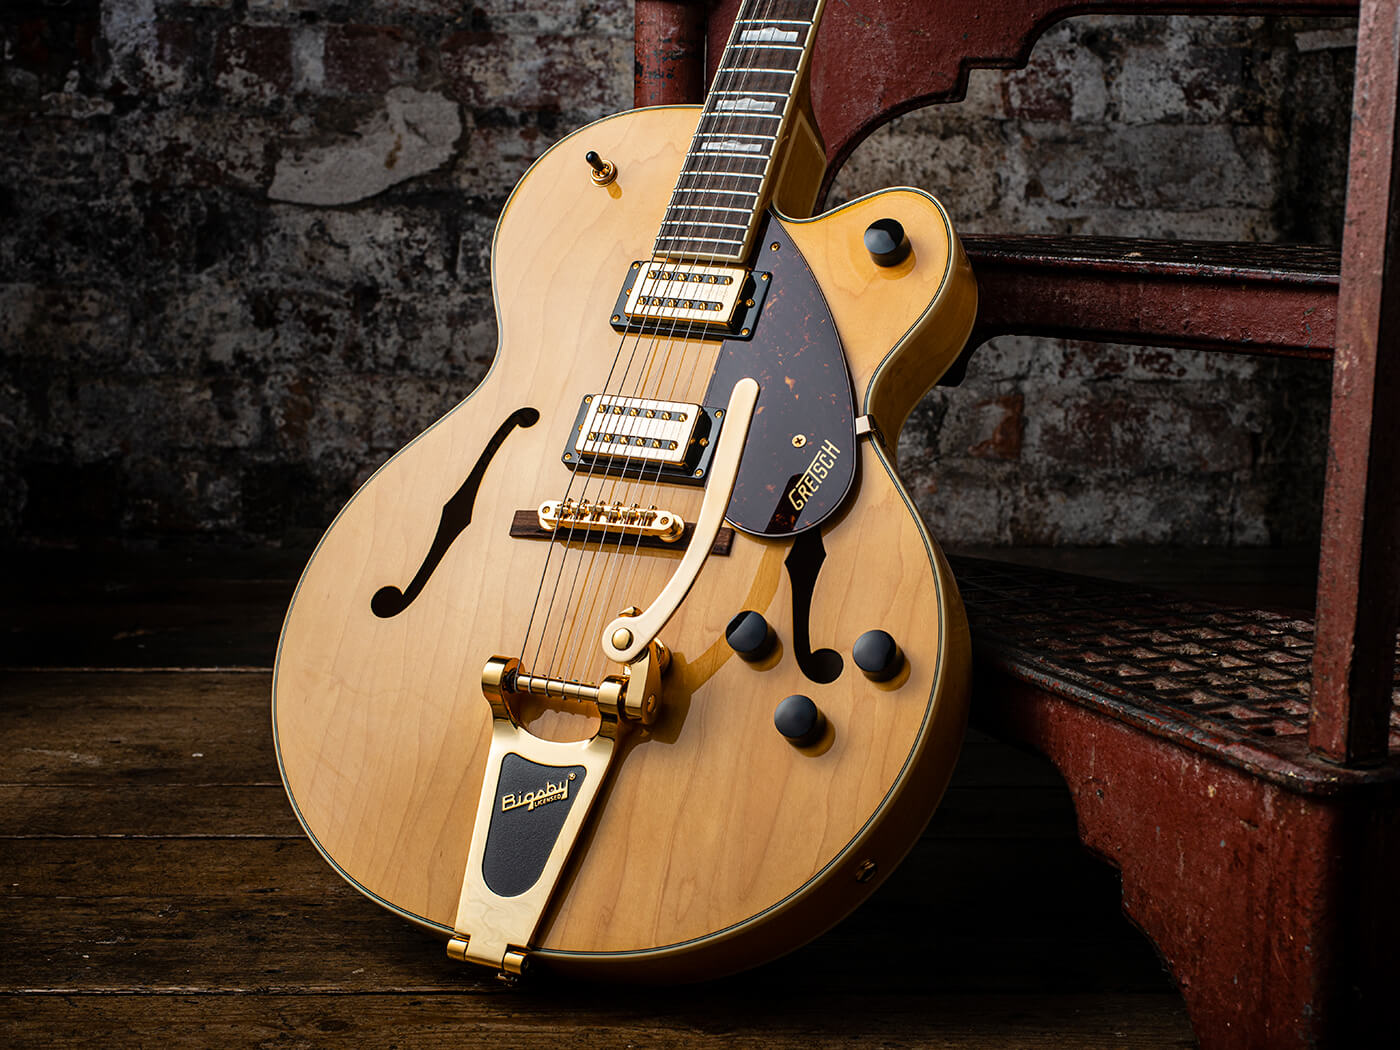 Gretsch G2410TG Streamliner review: Classic aesthetics with 